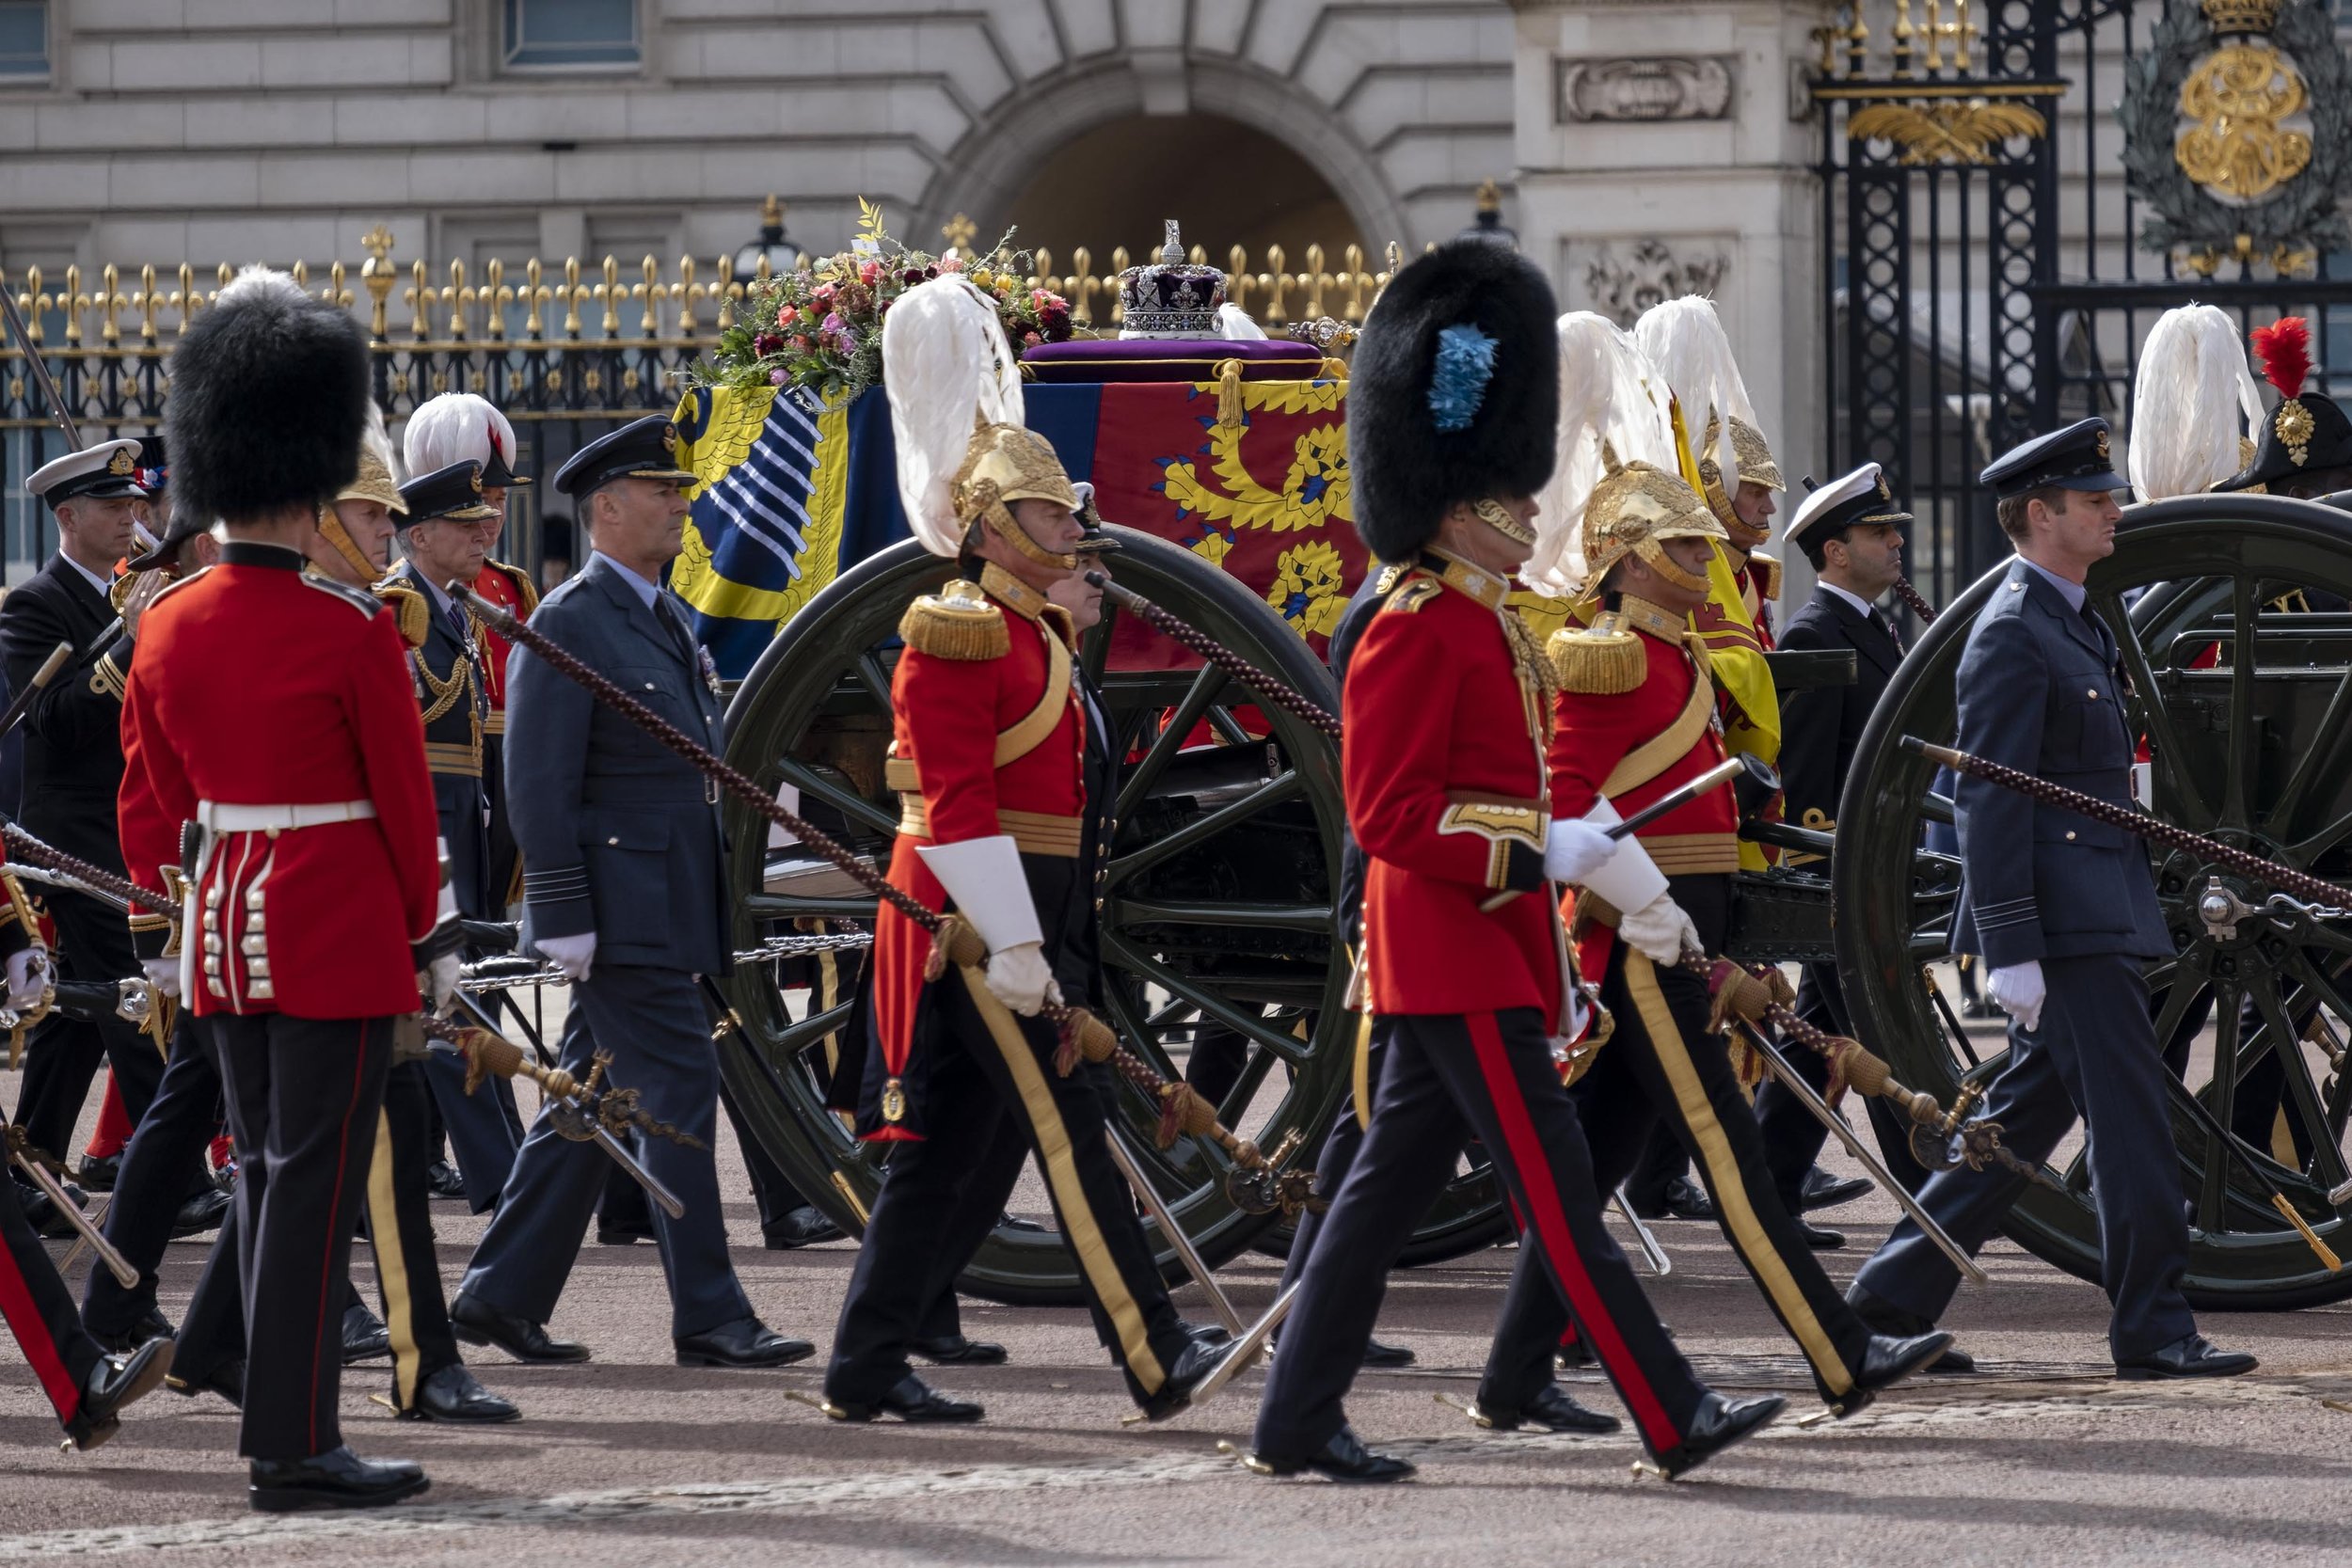  State Funeral of Queen Elizabeth II. Coffin lays upon the State Gun Carriage, with Imperial State Crown. 